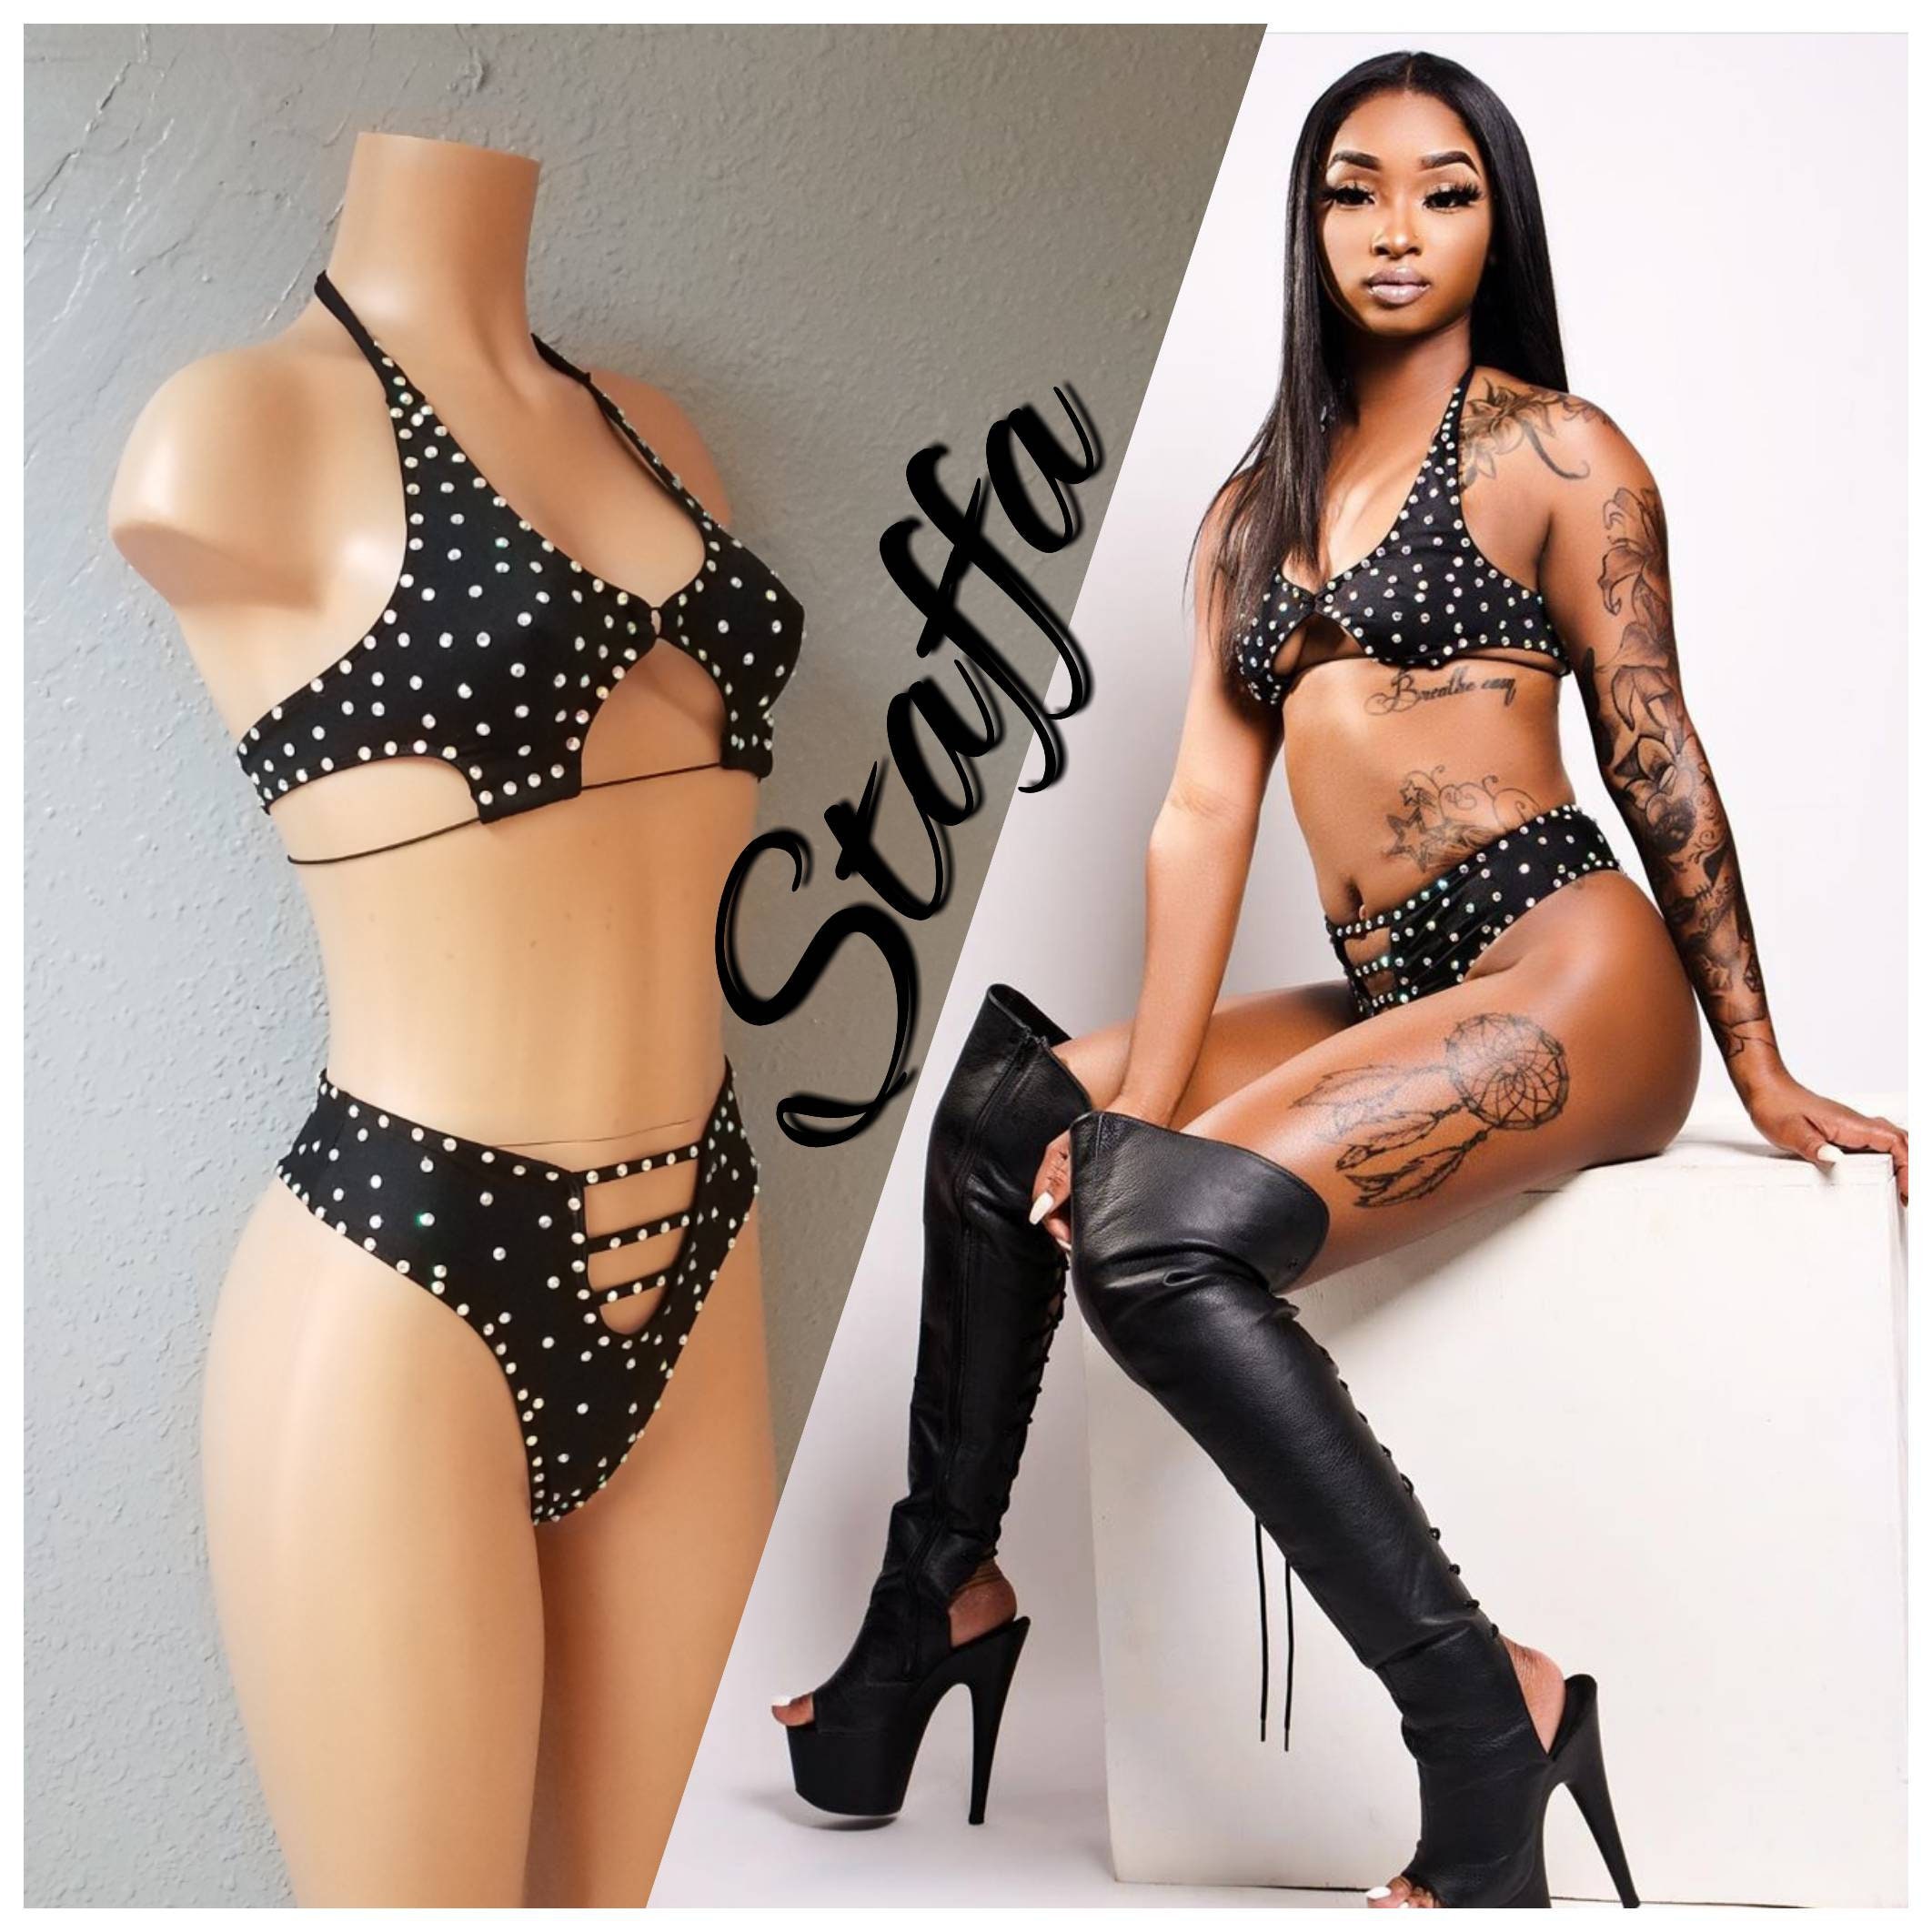 Please DM for all purchases or inquiries. #exoticdancewear #pzhouston  #exoticdanceroutfits #exoticwear #clubwear #stripperwear…